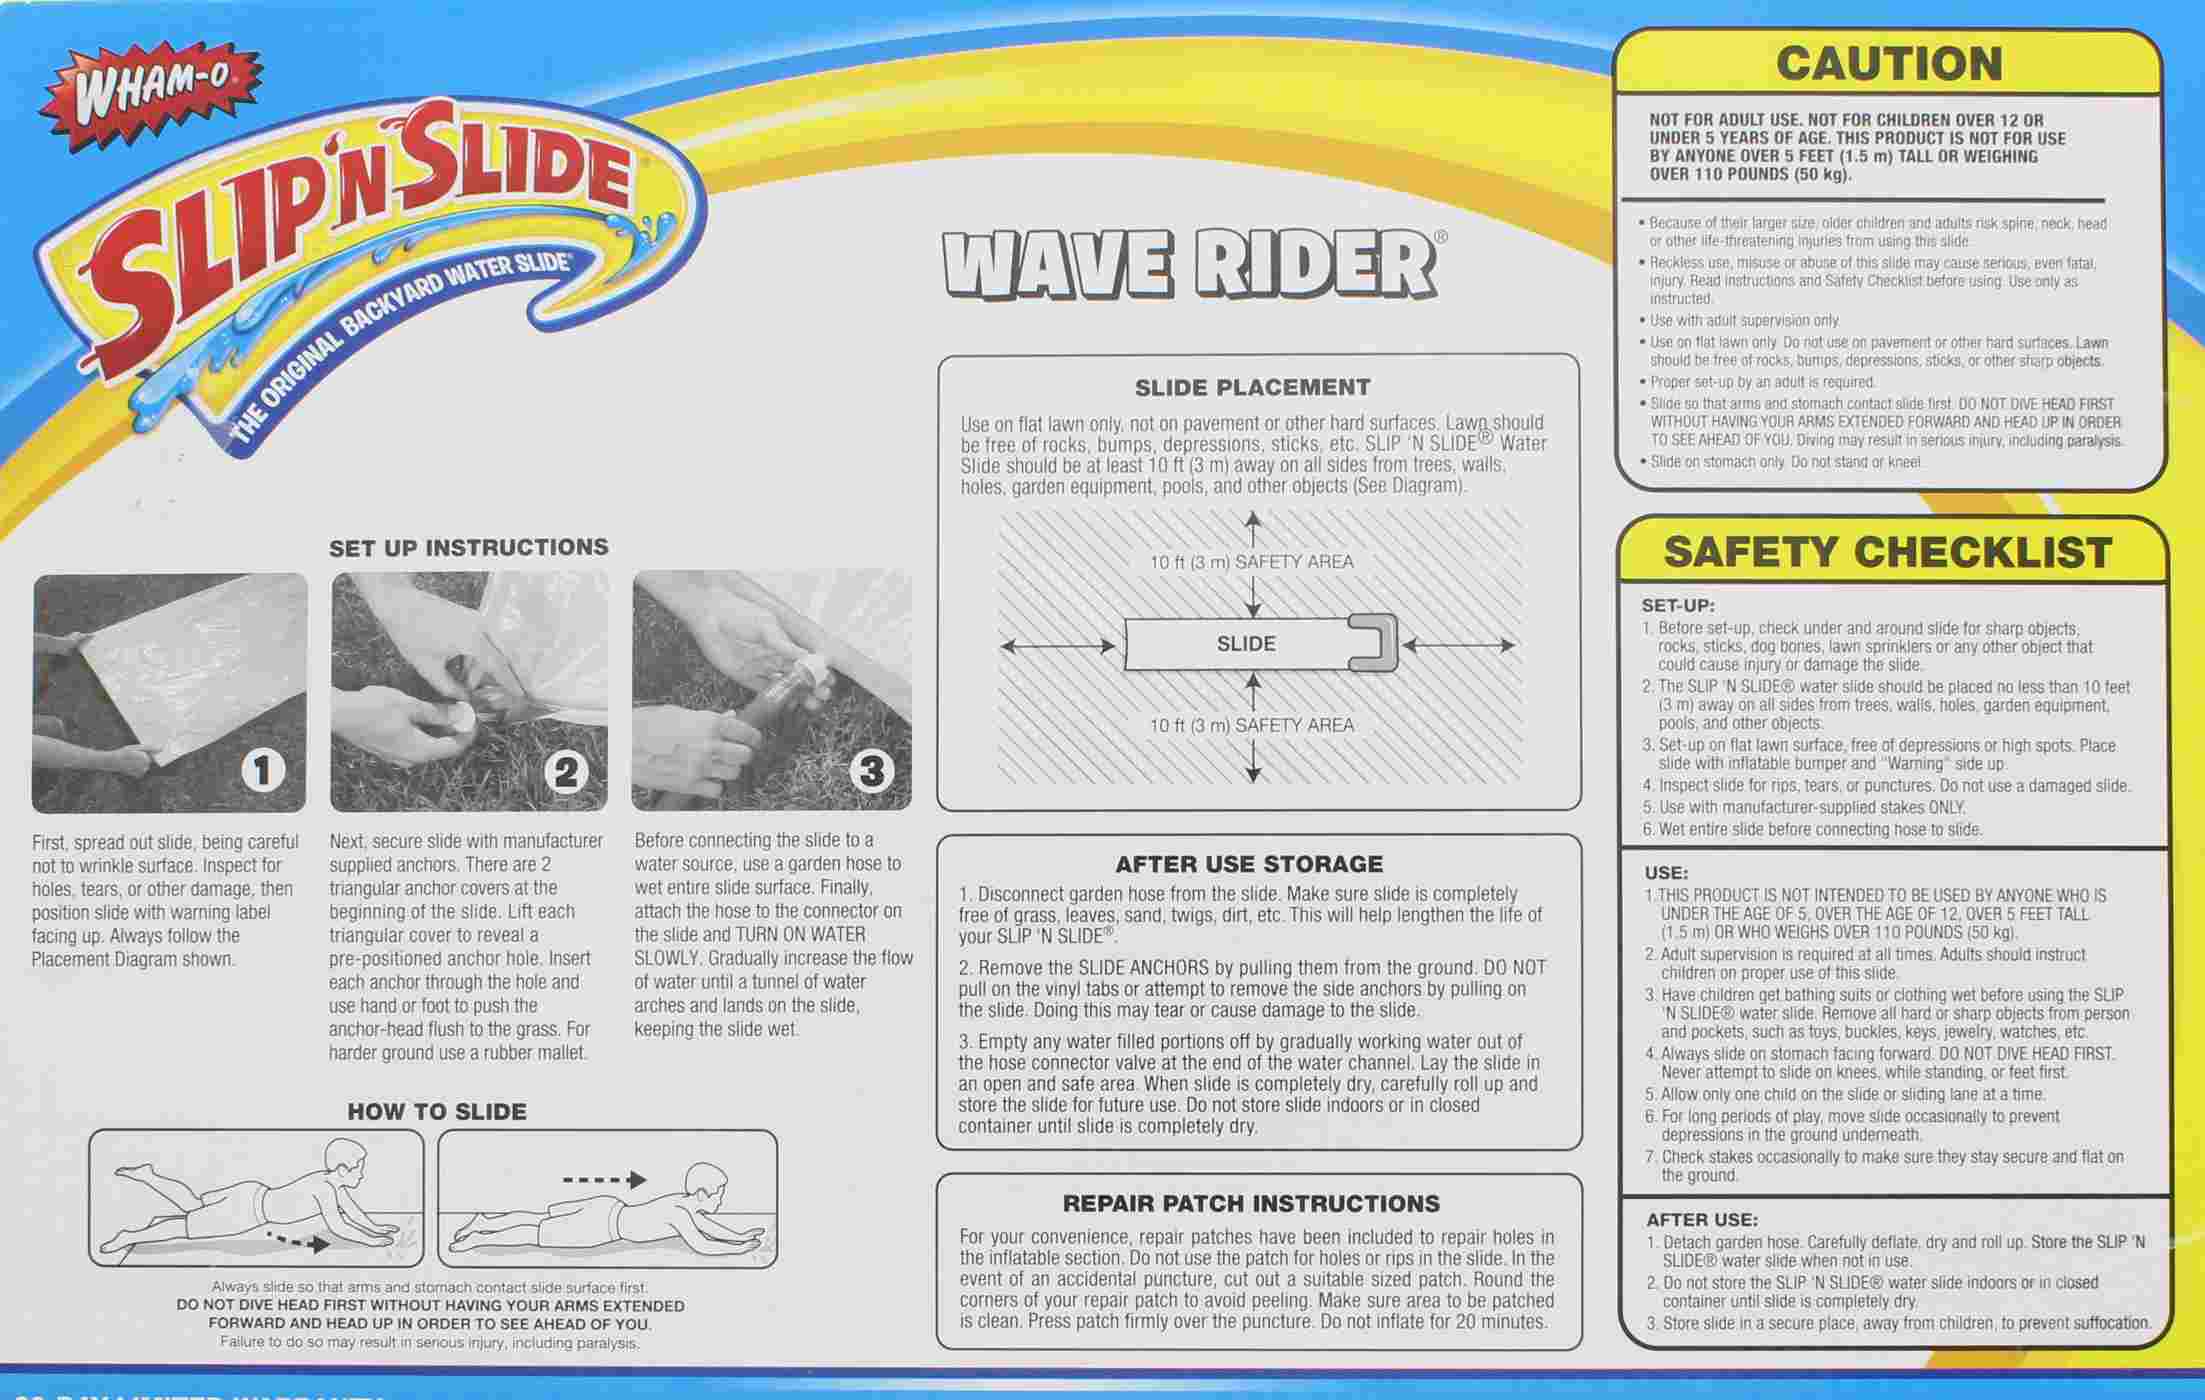 Wham-O Slip 'N Slide Wave Rider with Boogie; image 2 of 2